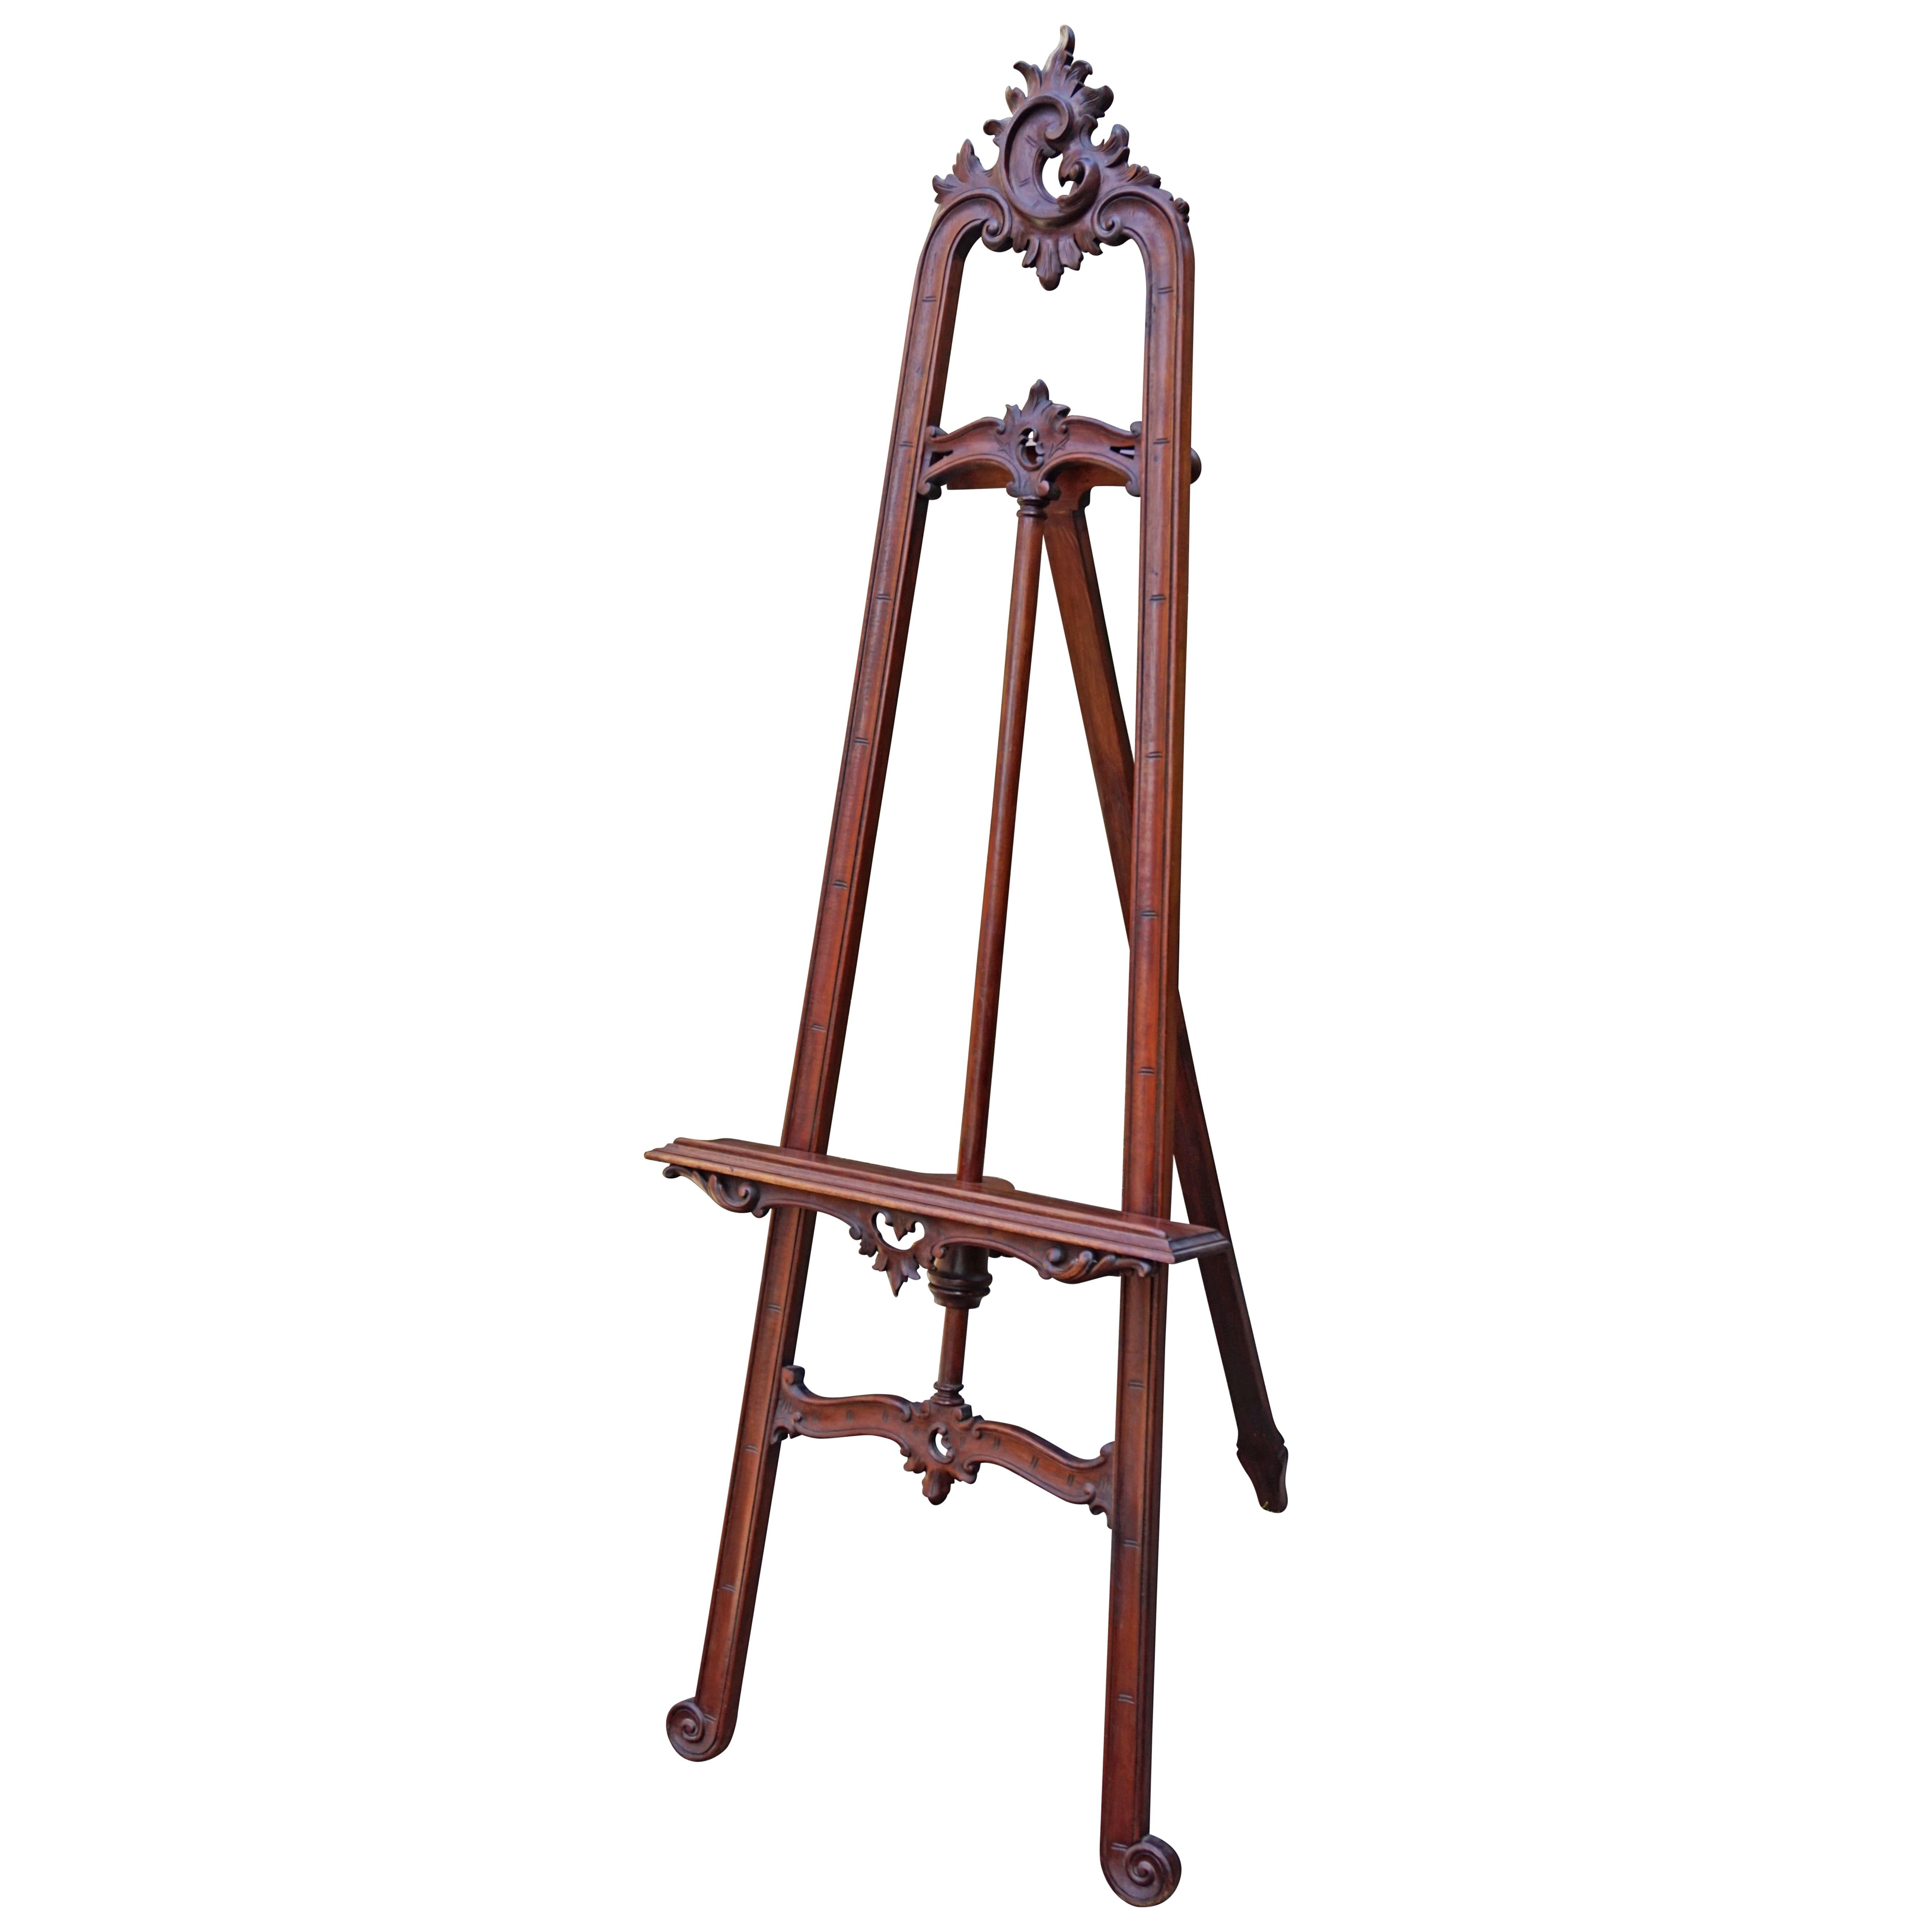 Wooden Easel Mahogany Finish Display Stand Picture Plate Holders Ornaments Arts 